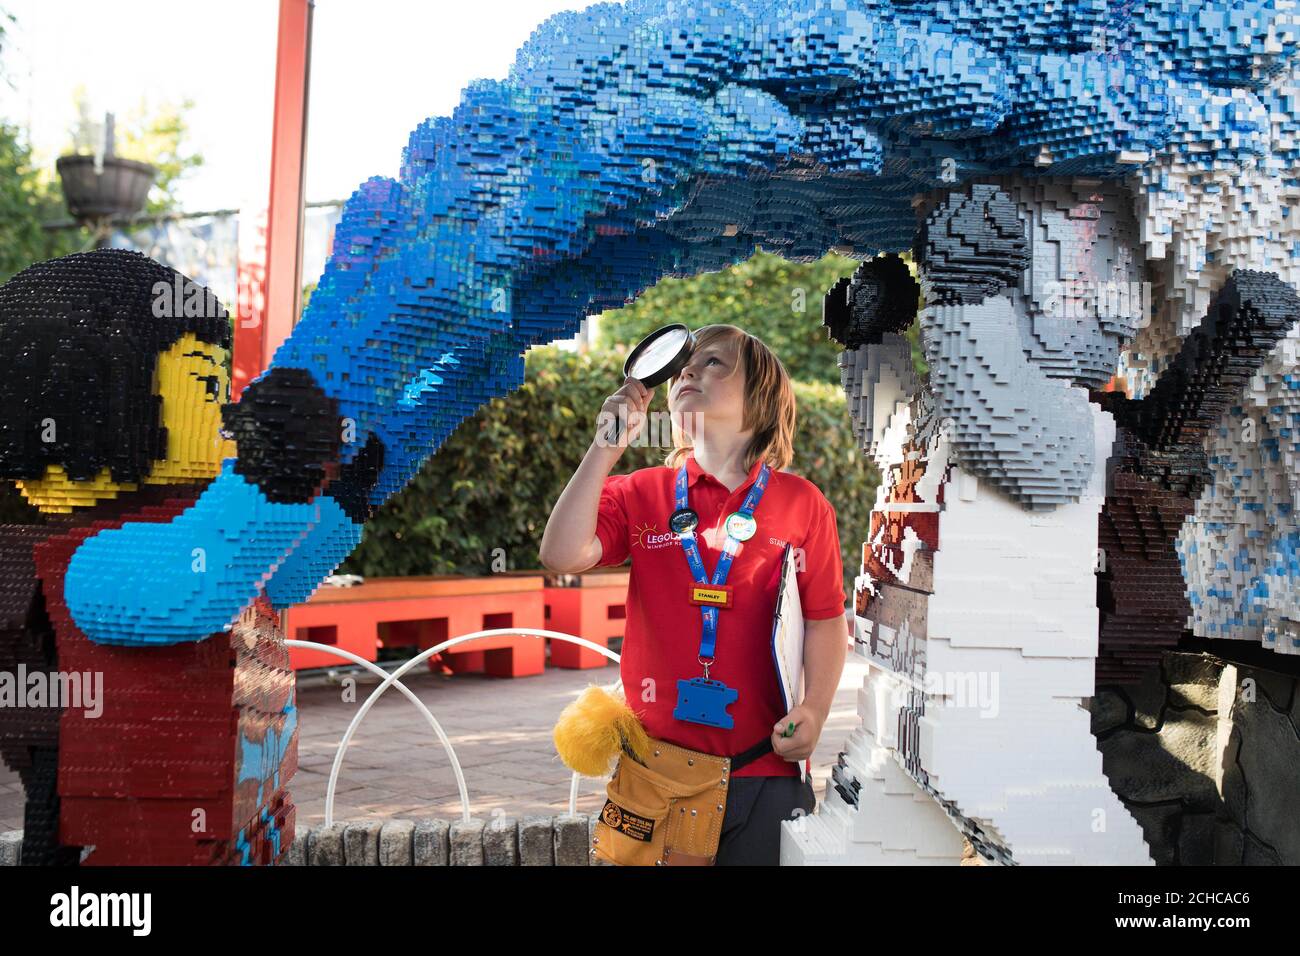 EDITORIAL USE ONLY Stanley Bolland, six, from Hampshire, undertakes some work experience as a 'Model Maker' at the Legoland Windsor Resort in Berkshire, after writing a letter applying for a job he saw advertised at the attraction in his local newspaper. PRESS ASSOCIATION. Issue date: Sunday September 3, 2017. Photo credit should read: David Parry/PA Wire  Stock Photo